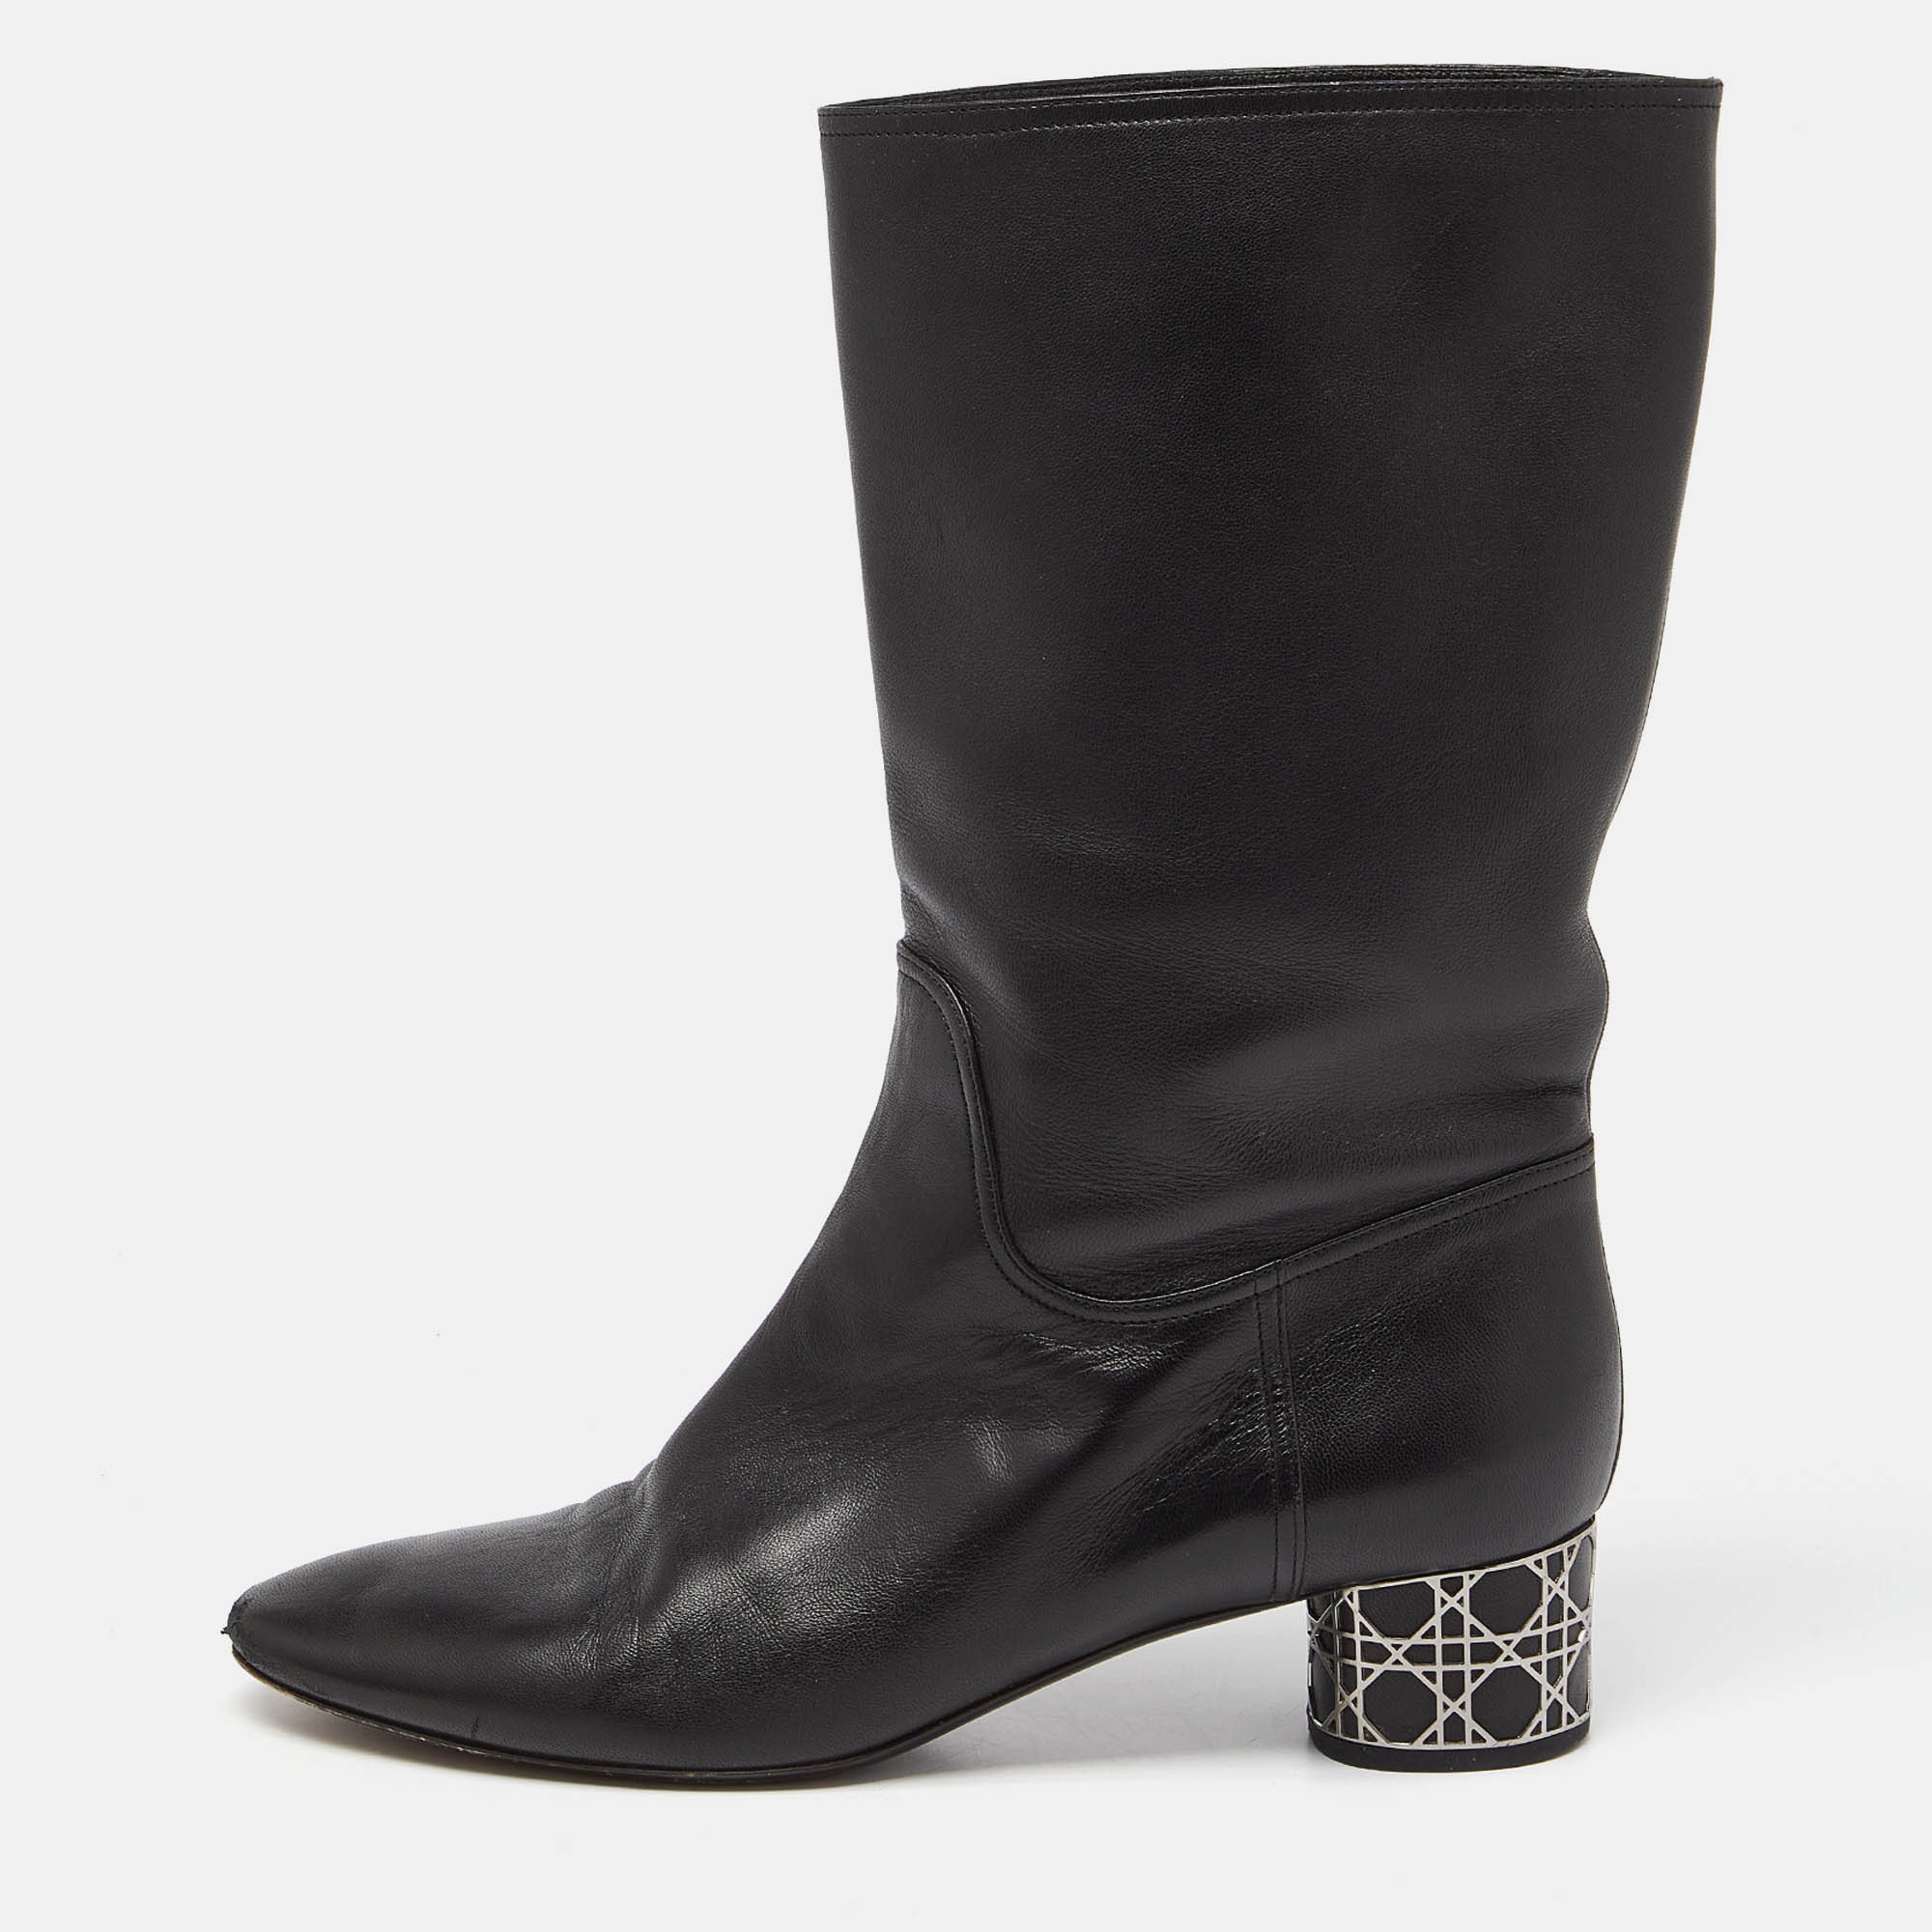 Dior black leather ankle length boots size 40